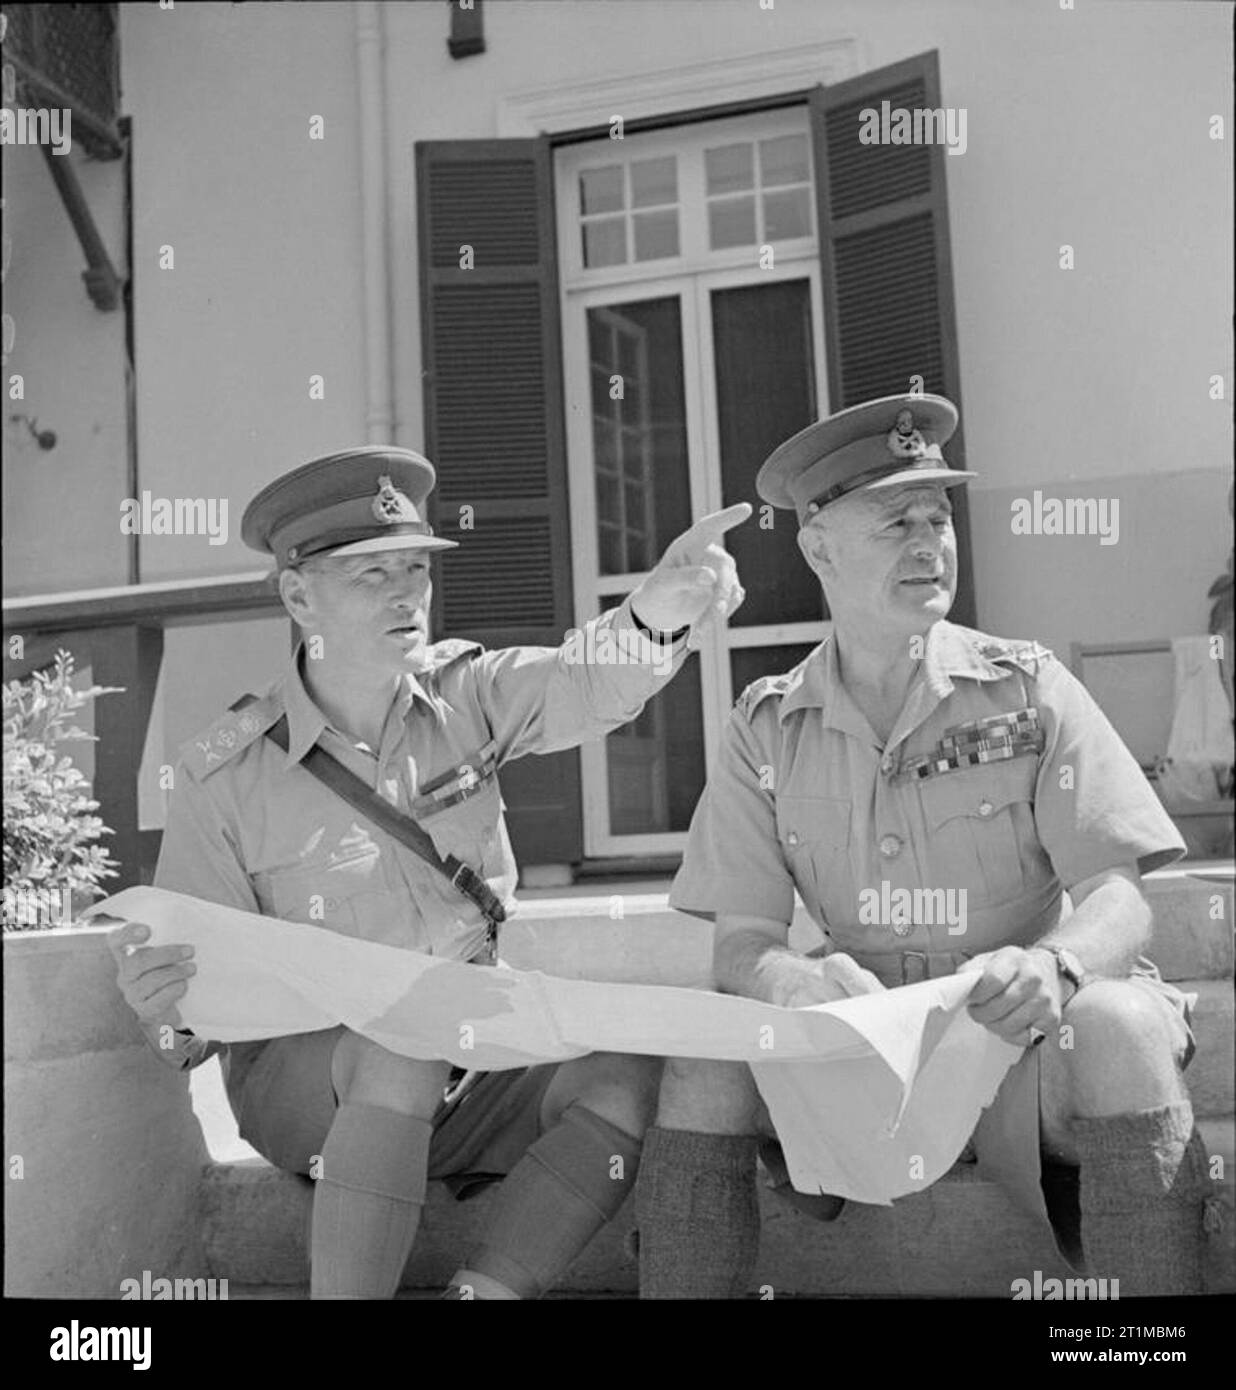 The British Army in the Middle East 1941 General Sir Archibald Wavell, Commander-in-Chief for India and General Sir Claude Auchinleck, Commander-in-Chief for the Middle East, 8 September 1941. Stock Photo